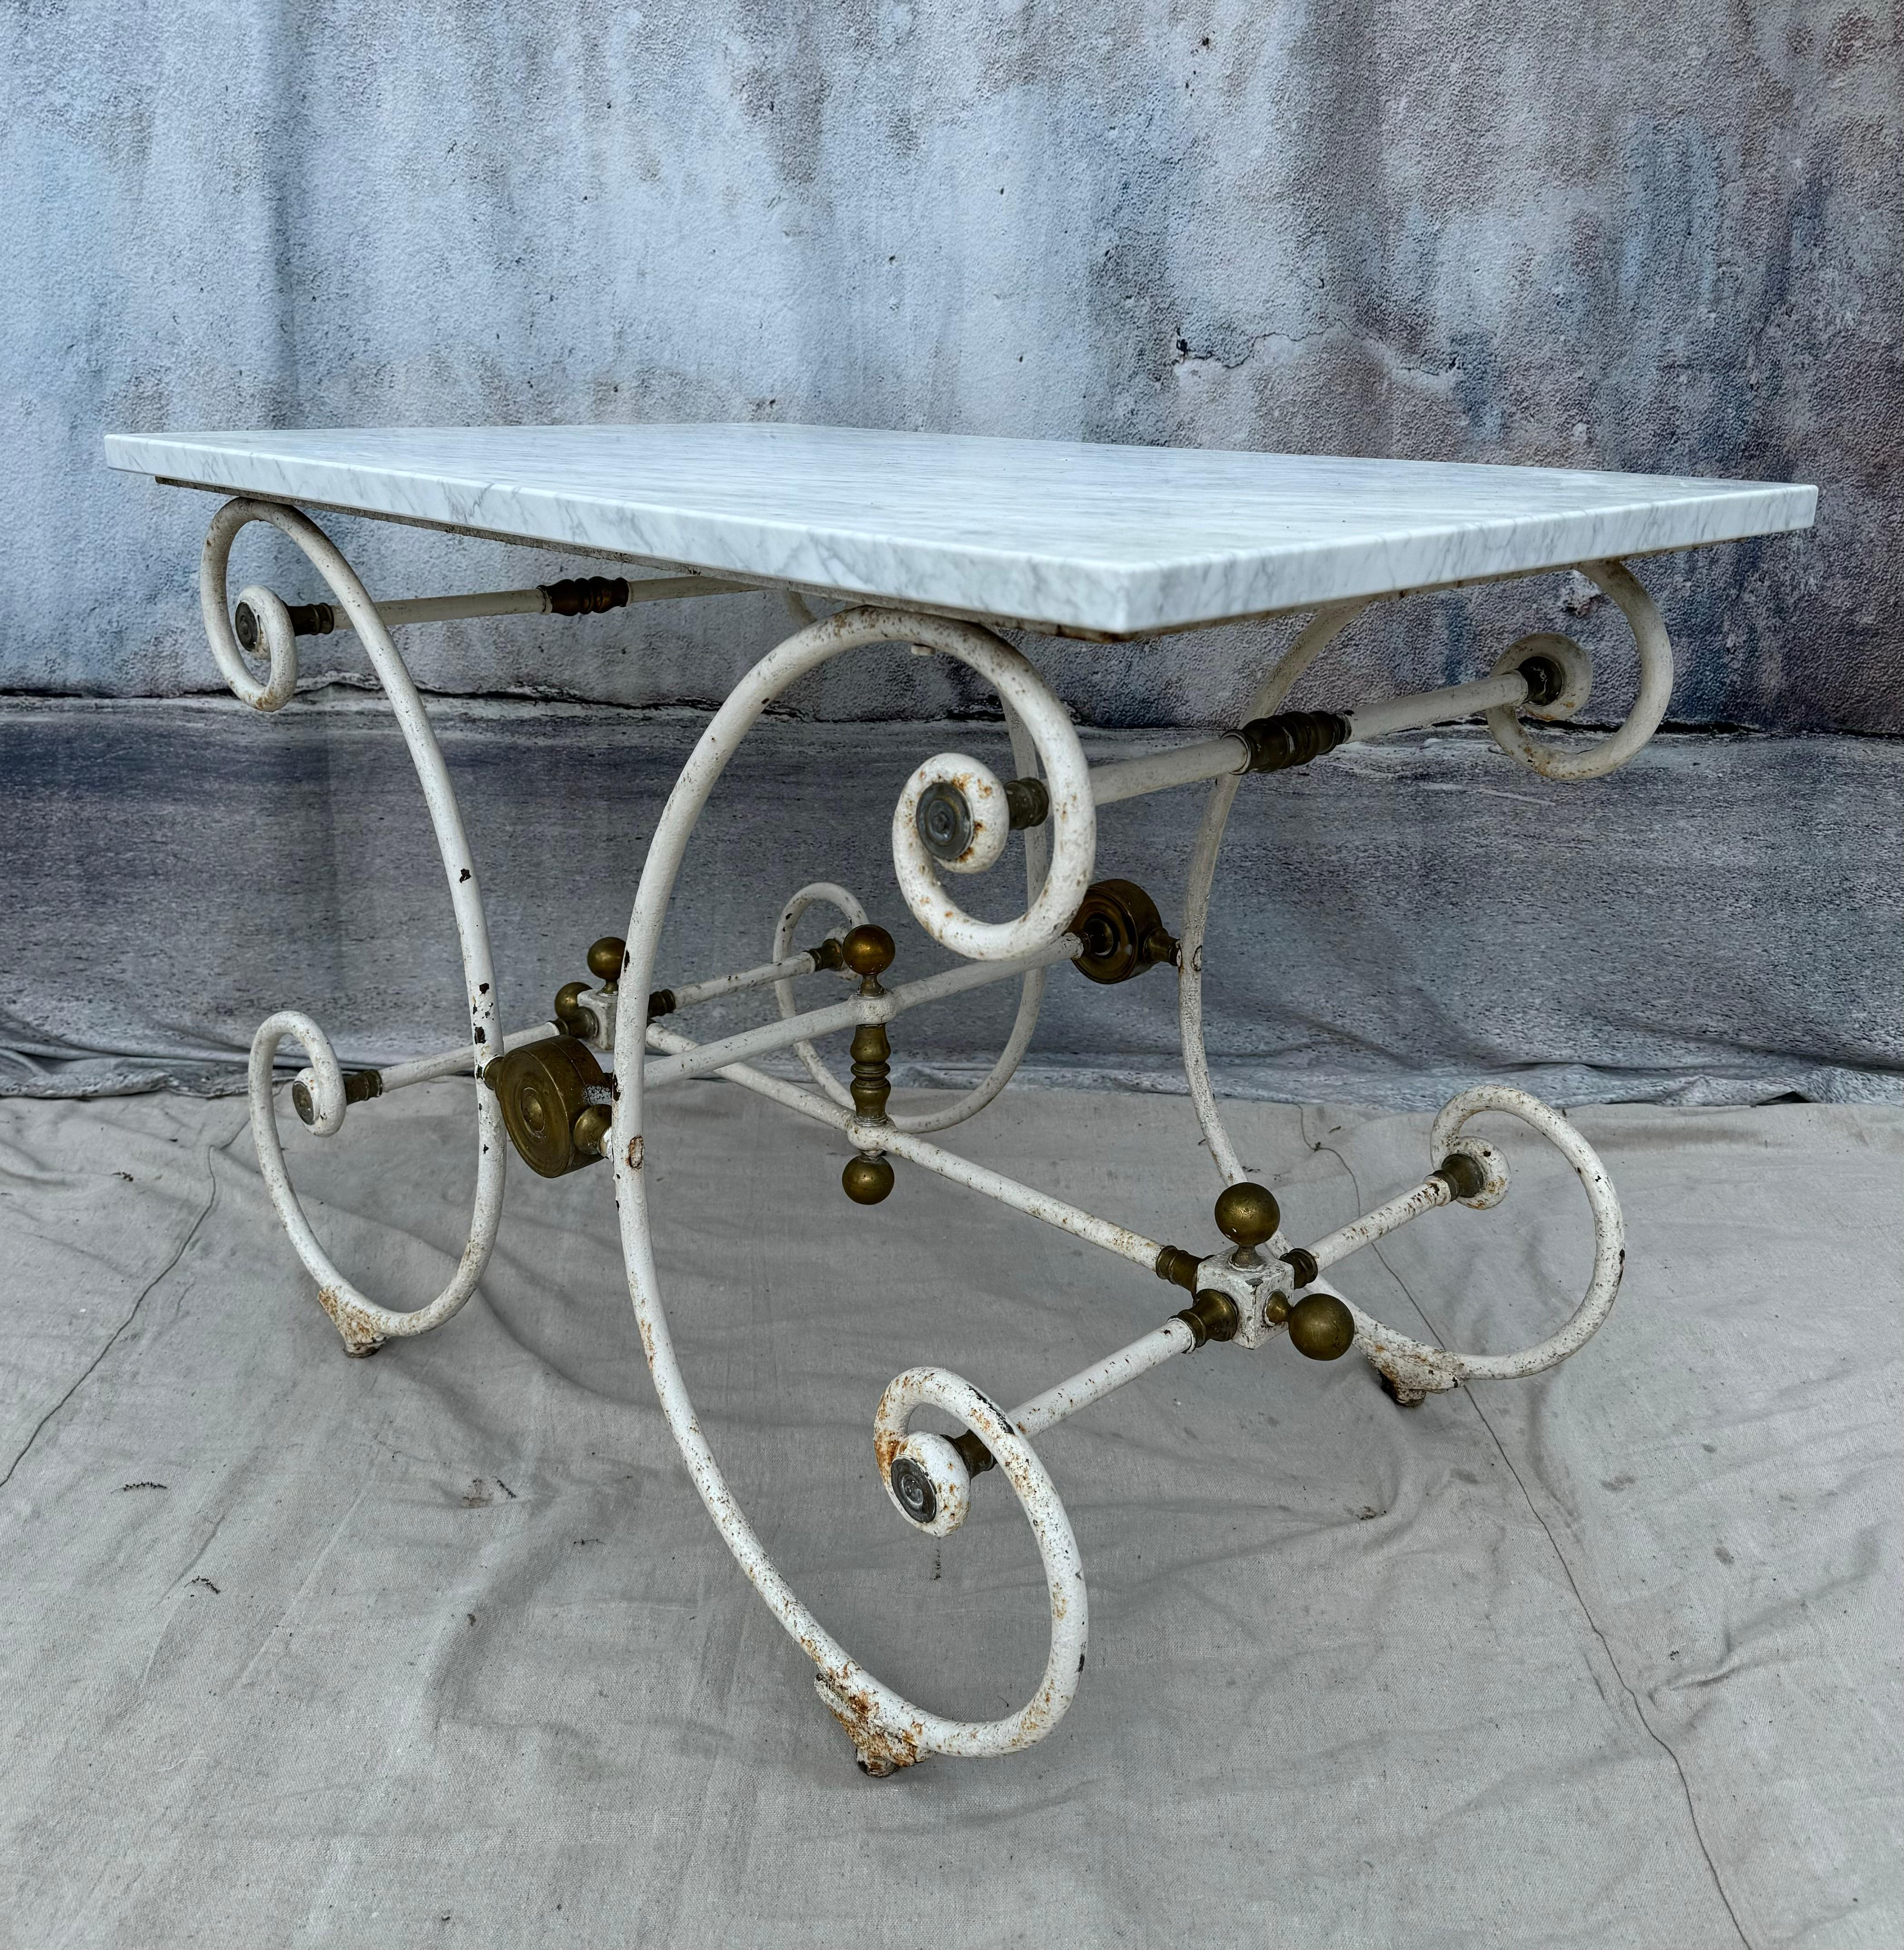 19th Century French J. Mareschal Butcher's Table In Good Condition For Sale In Bradenton, FL